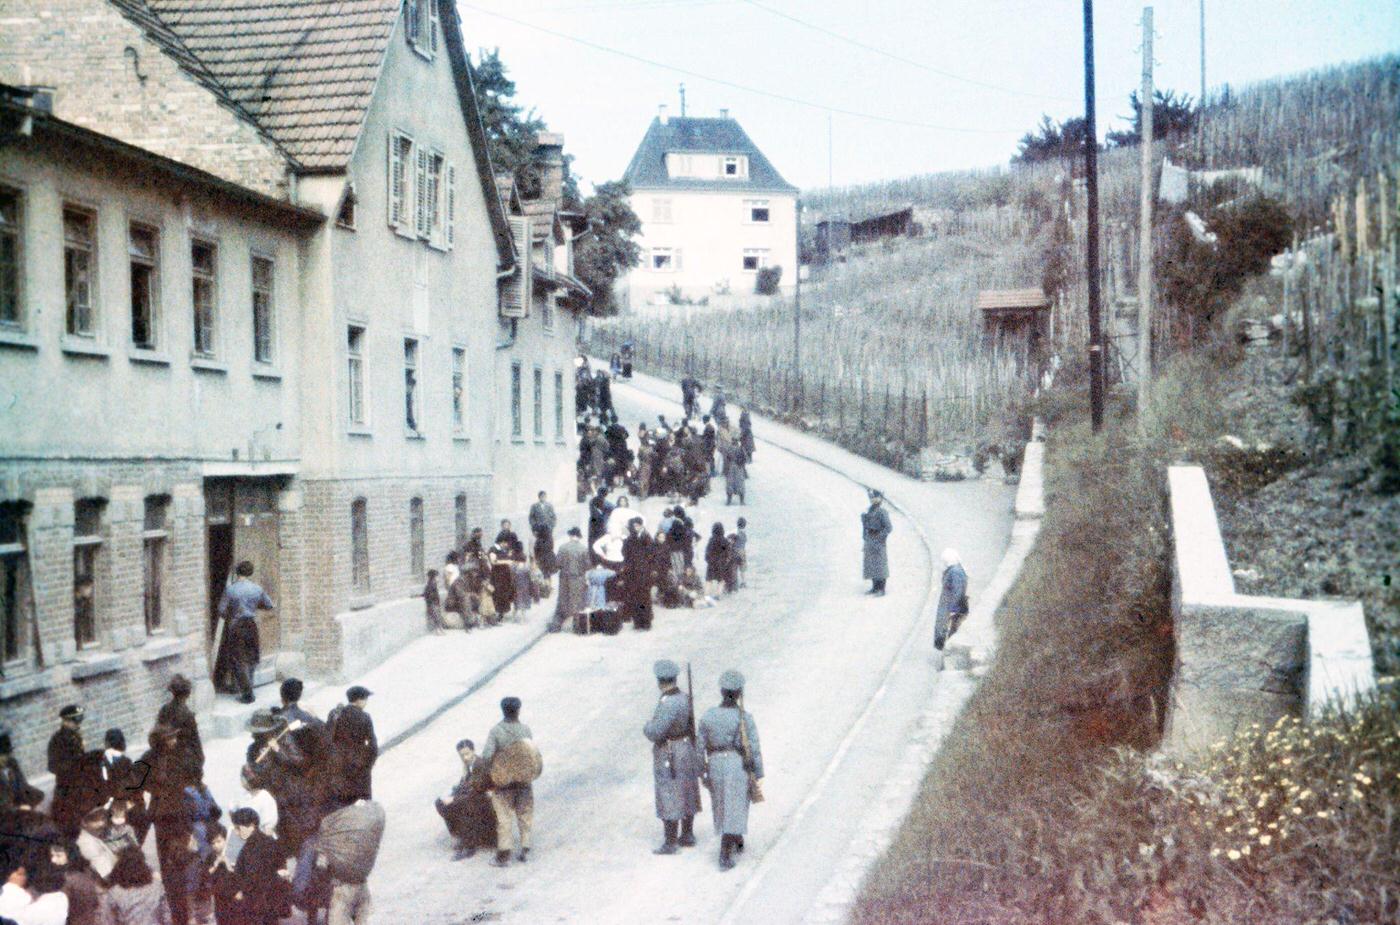 Sinti under police surveillance on Königstraße in Asperg before being locked up at Hohenasperg prison prior to deportation to camps in Poland, May 22, 1940.